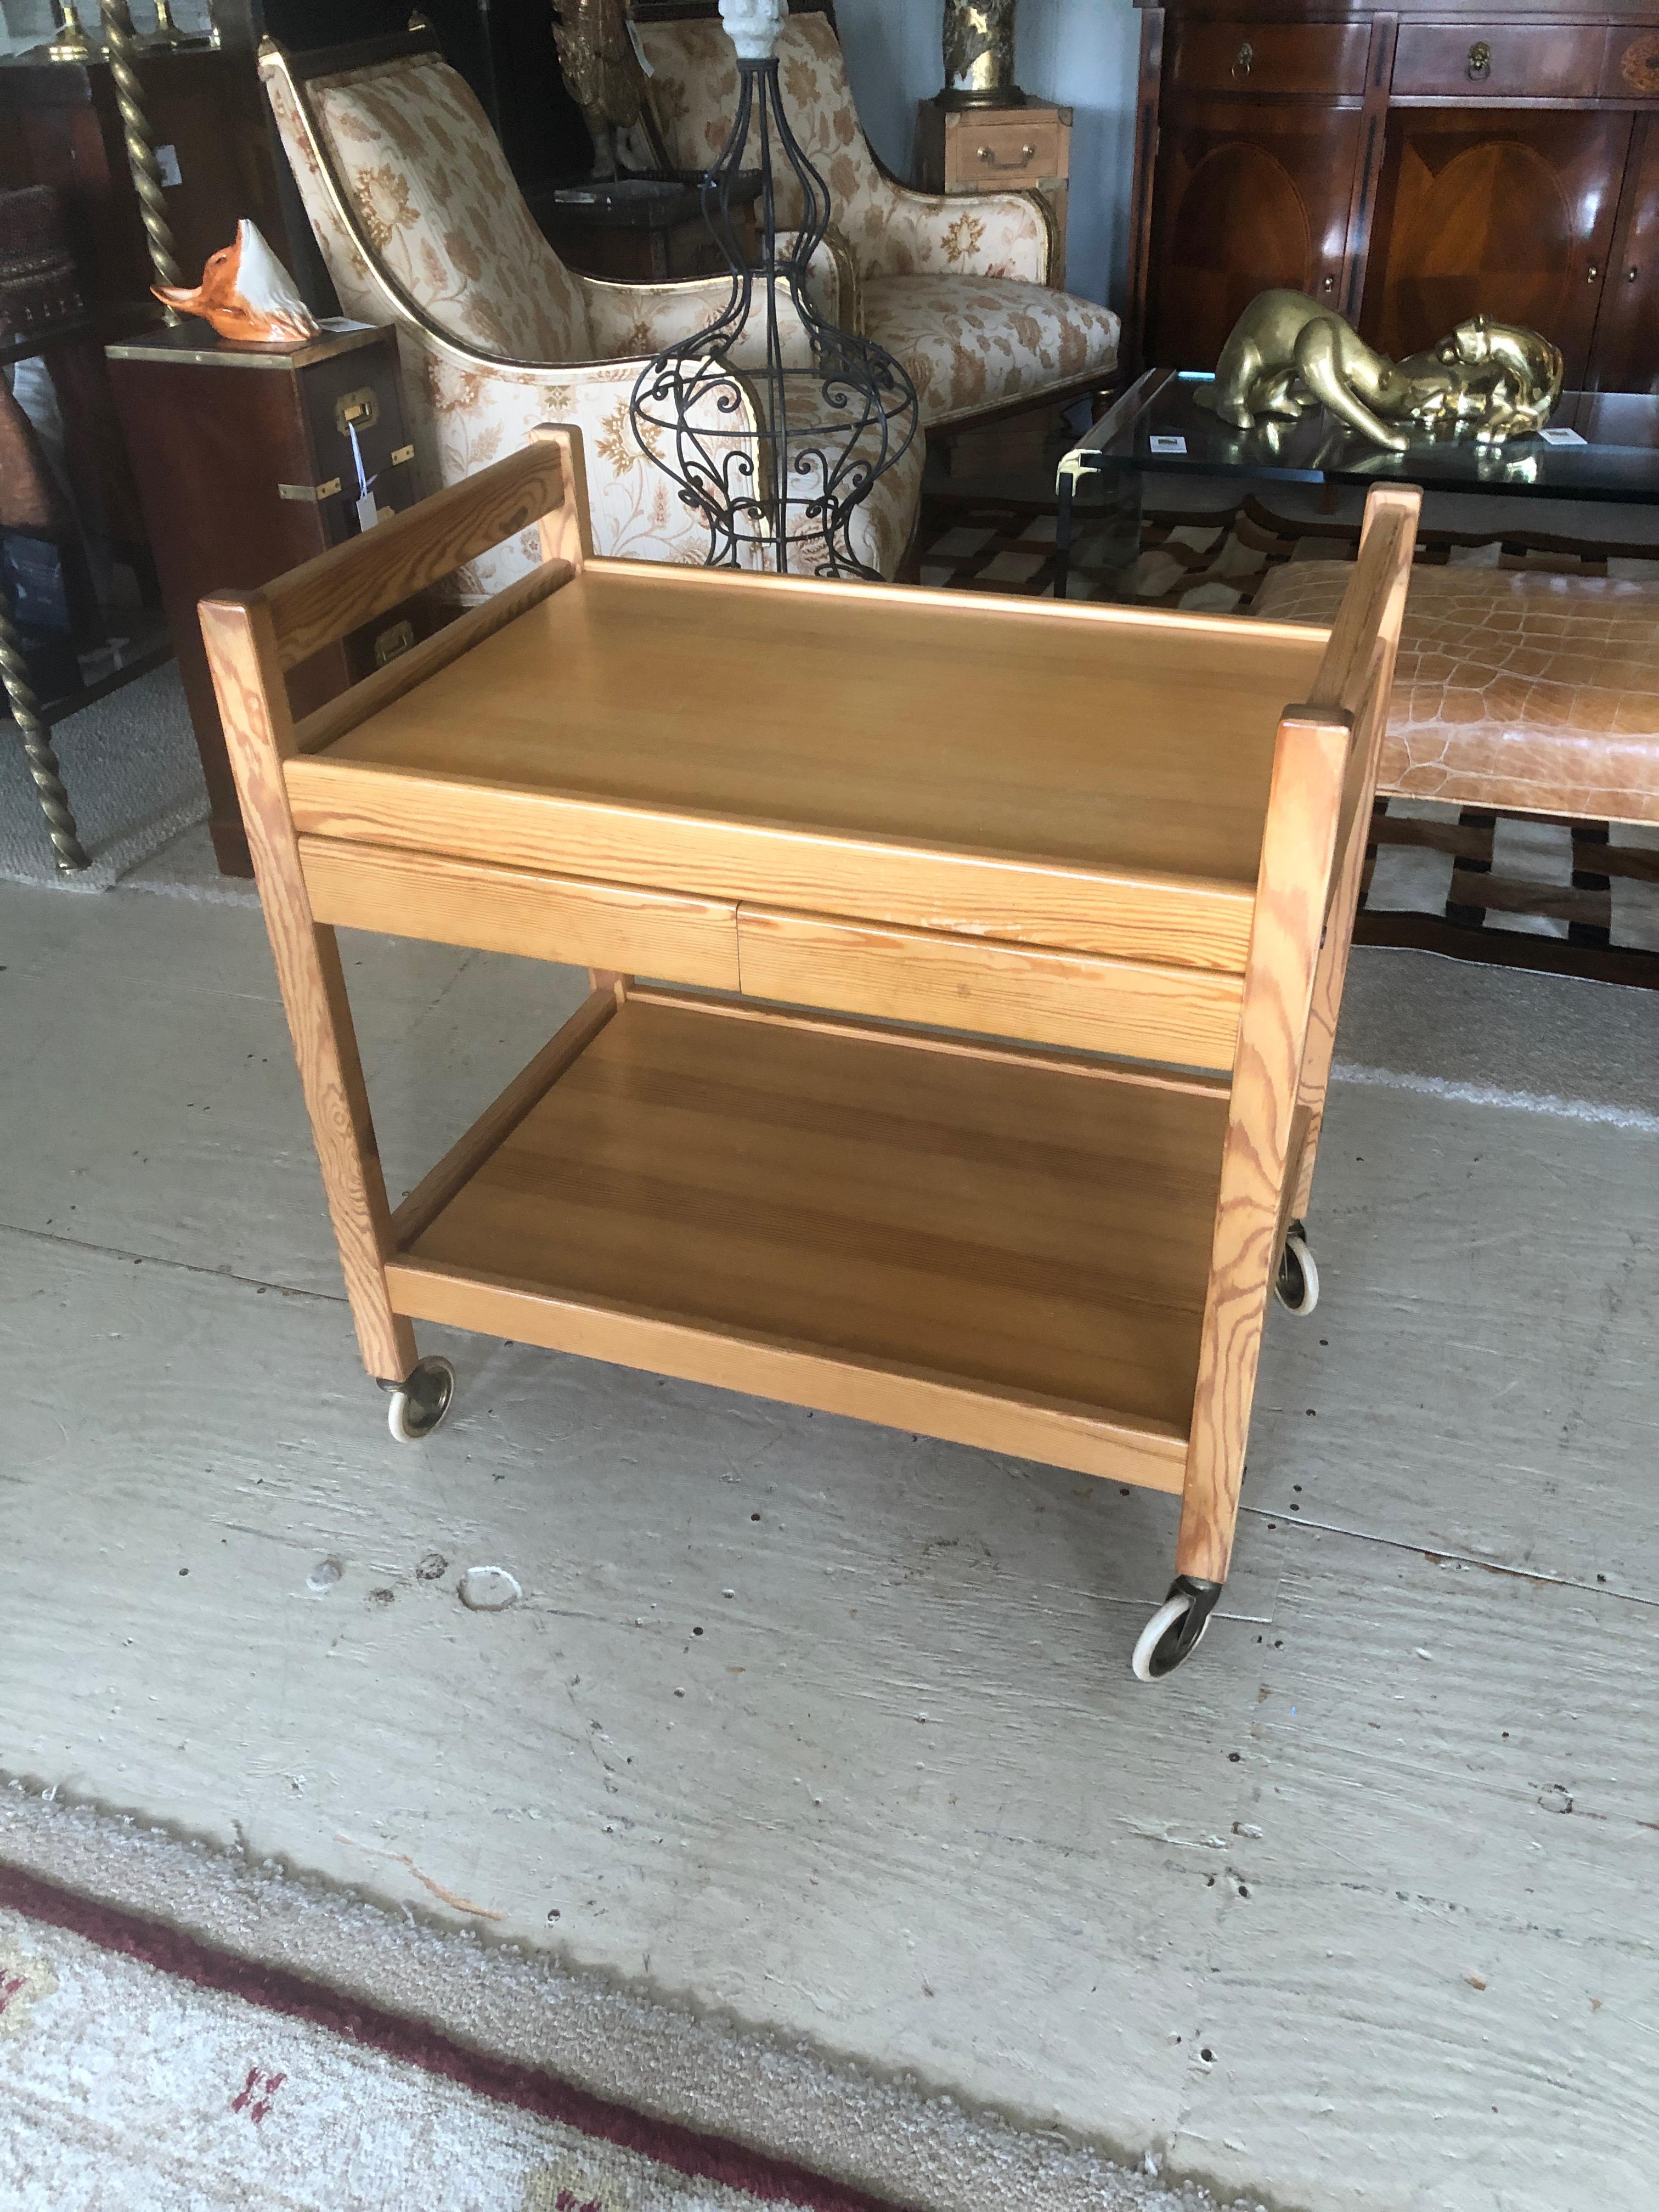 Sleek Mid-Century Modern Danish bar cart constructed o handsomely grained teak with two tiers and two handy drawers under the top service. Original vintage casters that function smoothly. Measures: To top tier 25 H; to bottom tier 8.5 H.